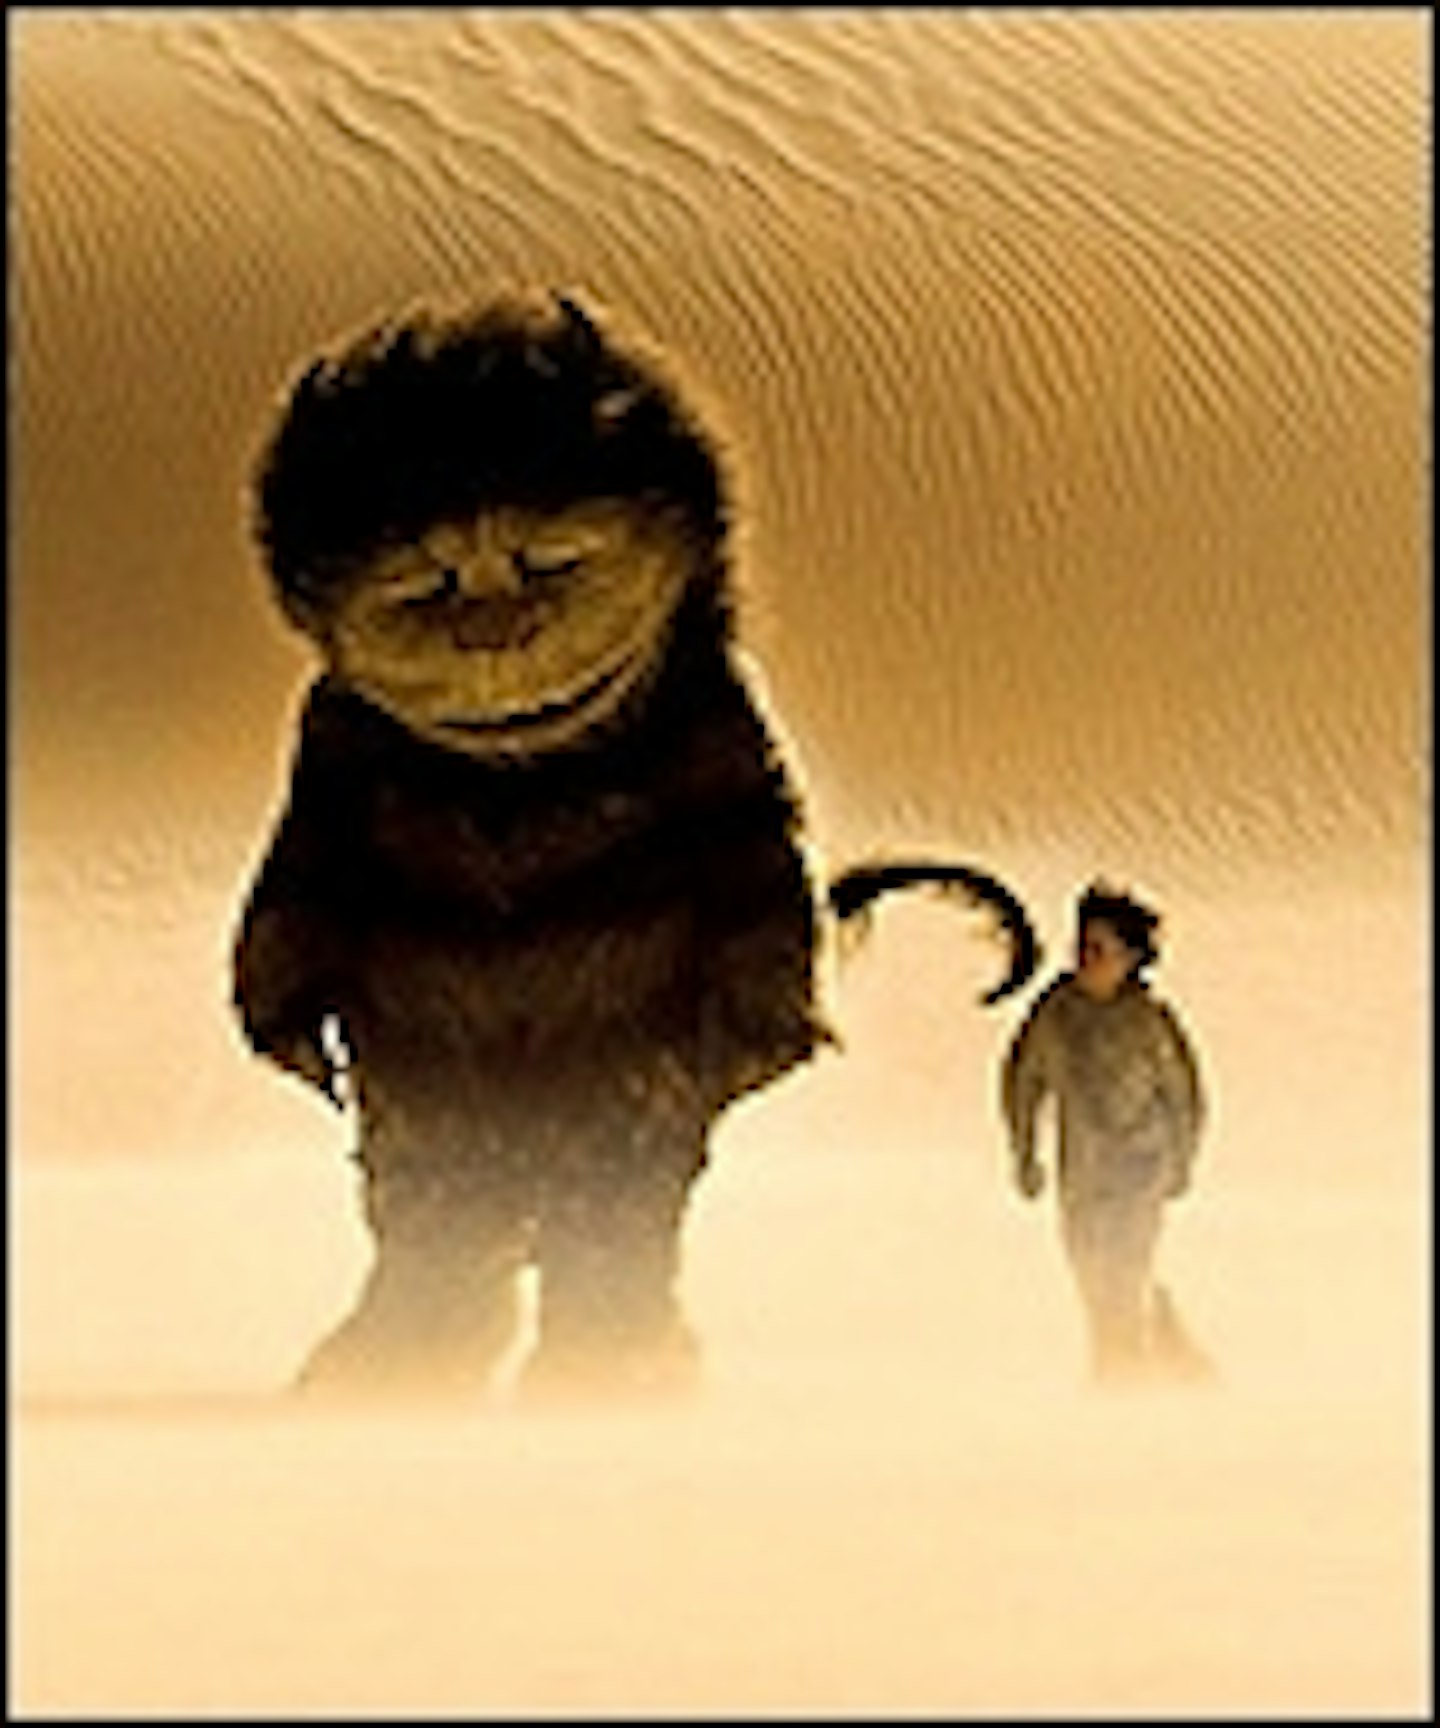 Where The Wild Things Are Trailer Online